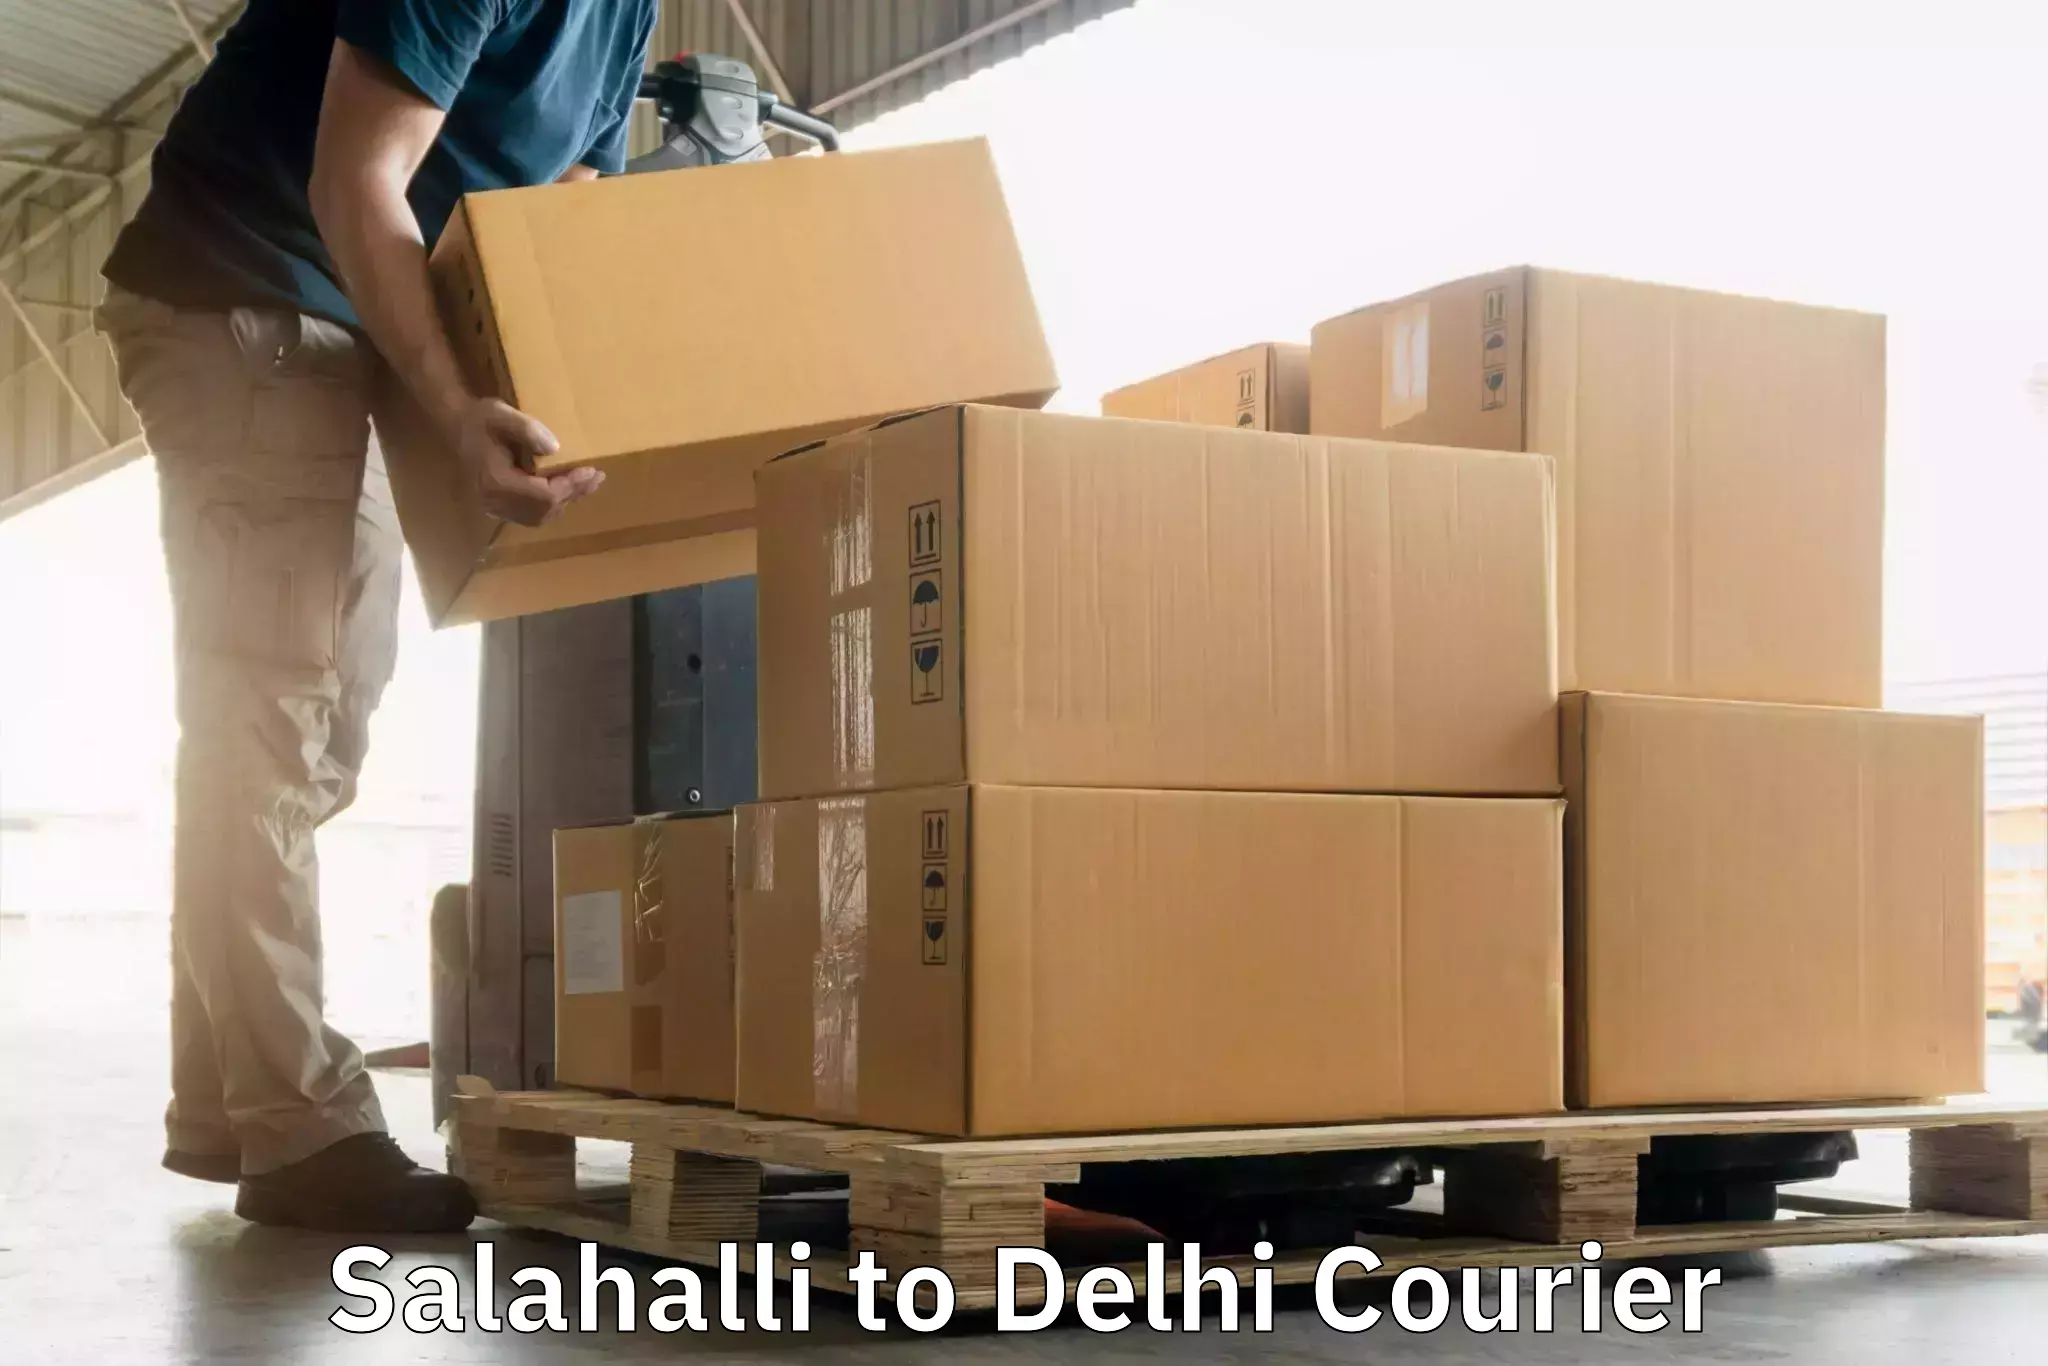 Nationwide parcel services Salahalli to Lodhi Road